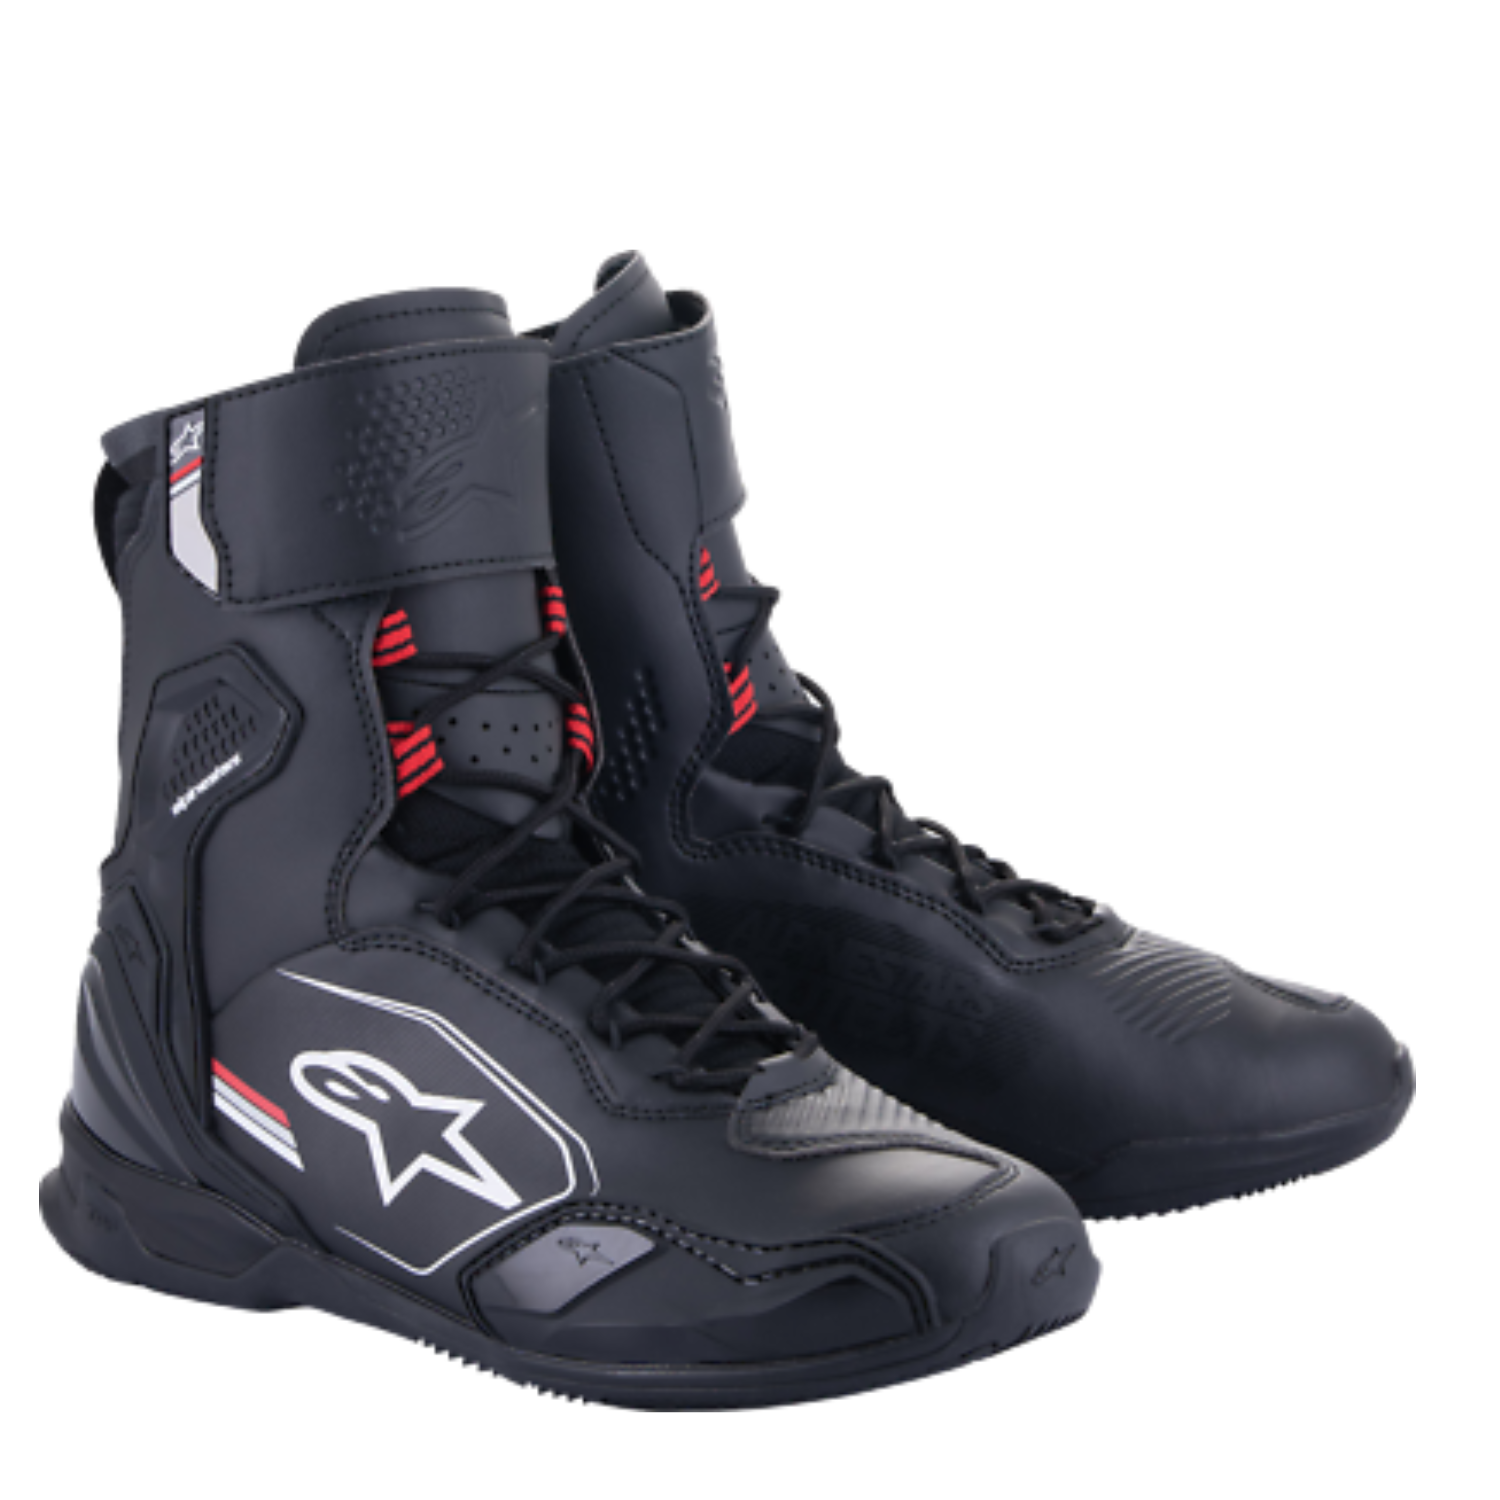 Image of Alpinestars Superfaster Shoes Black Gray Bright Red Taille US 9